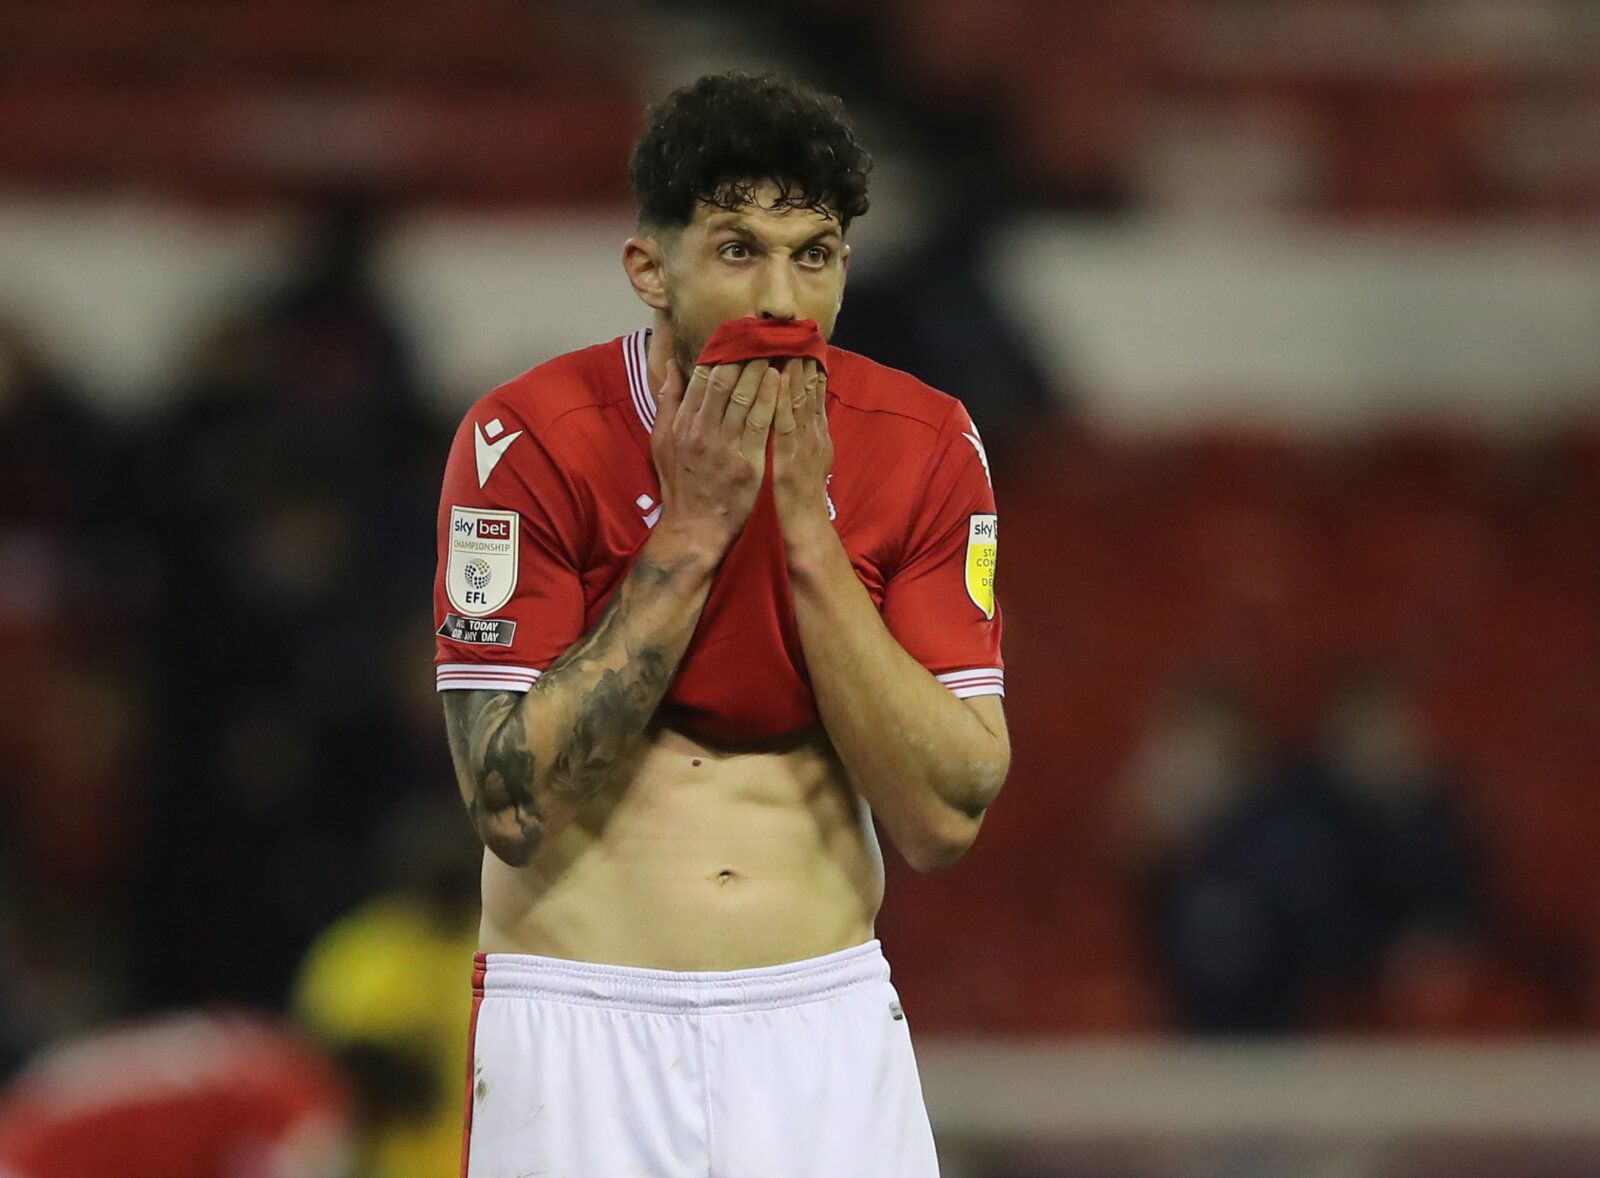 Soccer Football - Championship - Nottingham Forest v Norwich City - The City Ground, Nottingham, Britain - March 17, 2021 Nottingham Forest's Tobias Figueiredo reacts after the match Action Images/Molly Darlington EDITORIAL USE ONLY. No use with unauthorized audio, video, data, fixture lists, club/league logos or 'live' services. Online in-match use limited to 75 images, no video emulation. No use in betting, games or single club /league/player publications.  Please contact your account represen